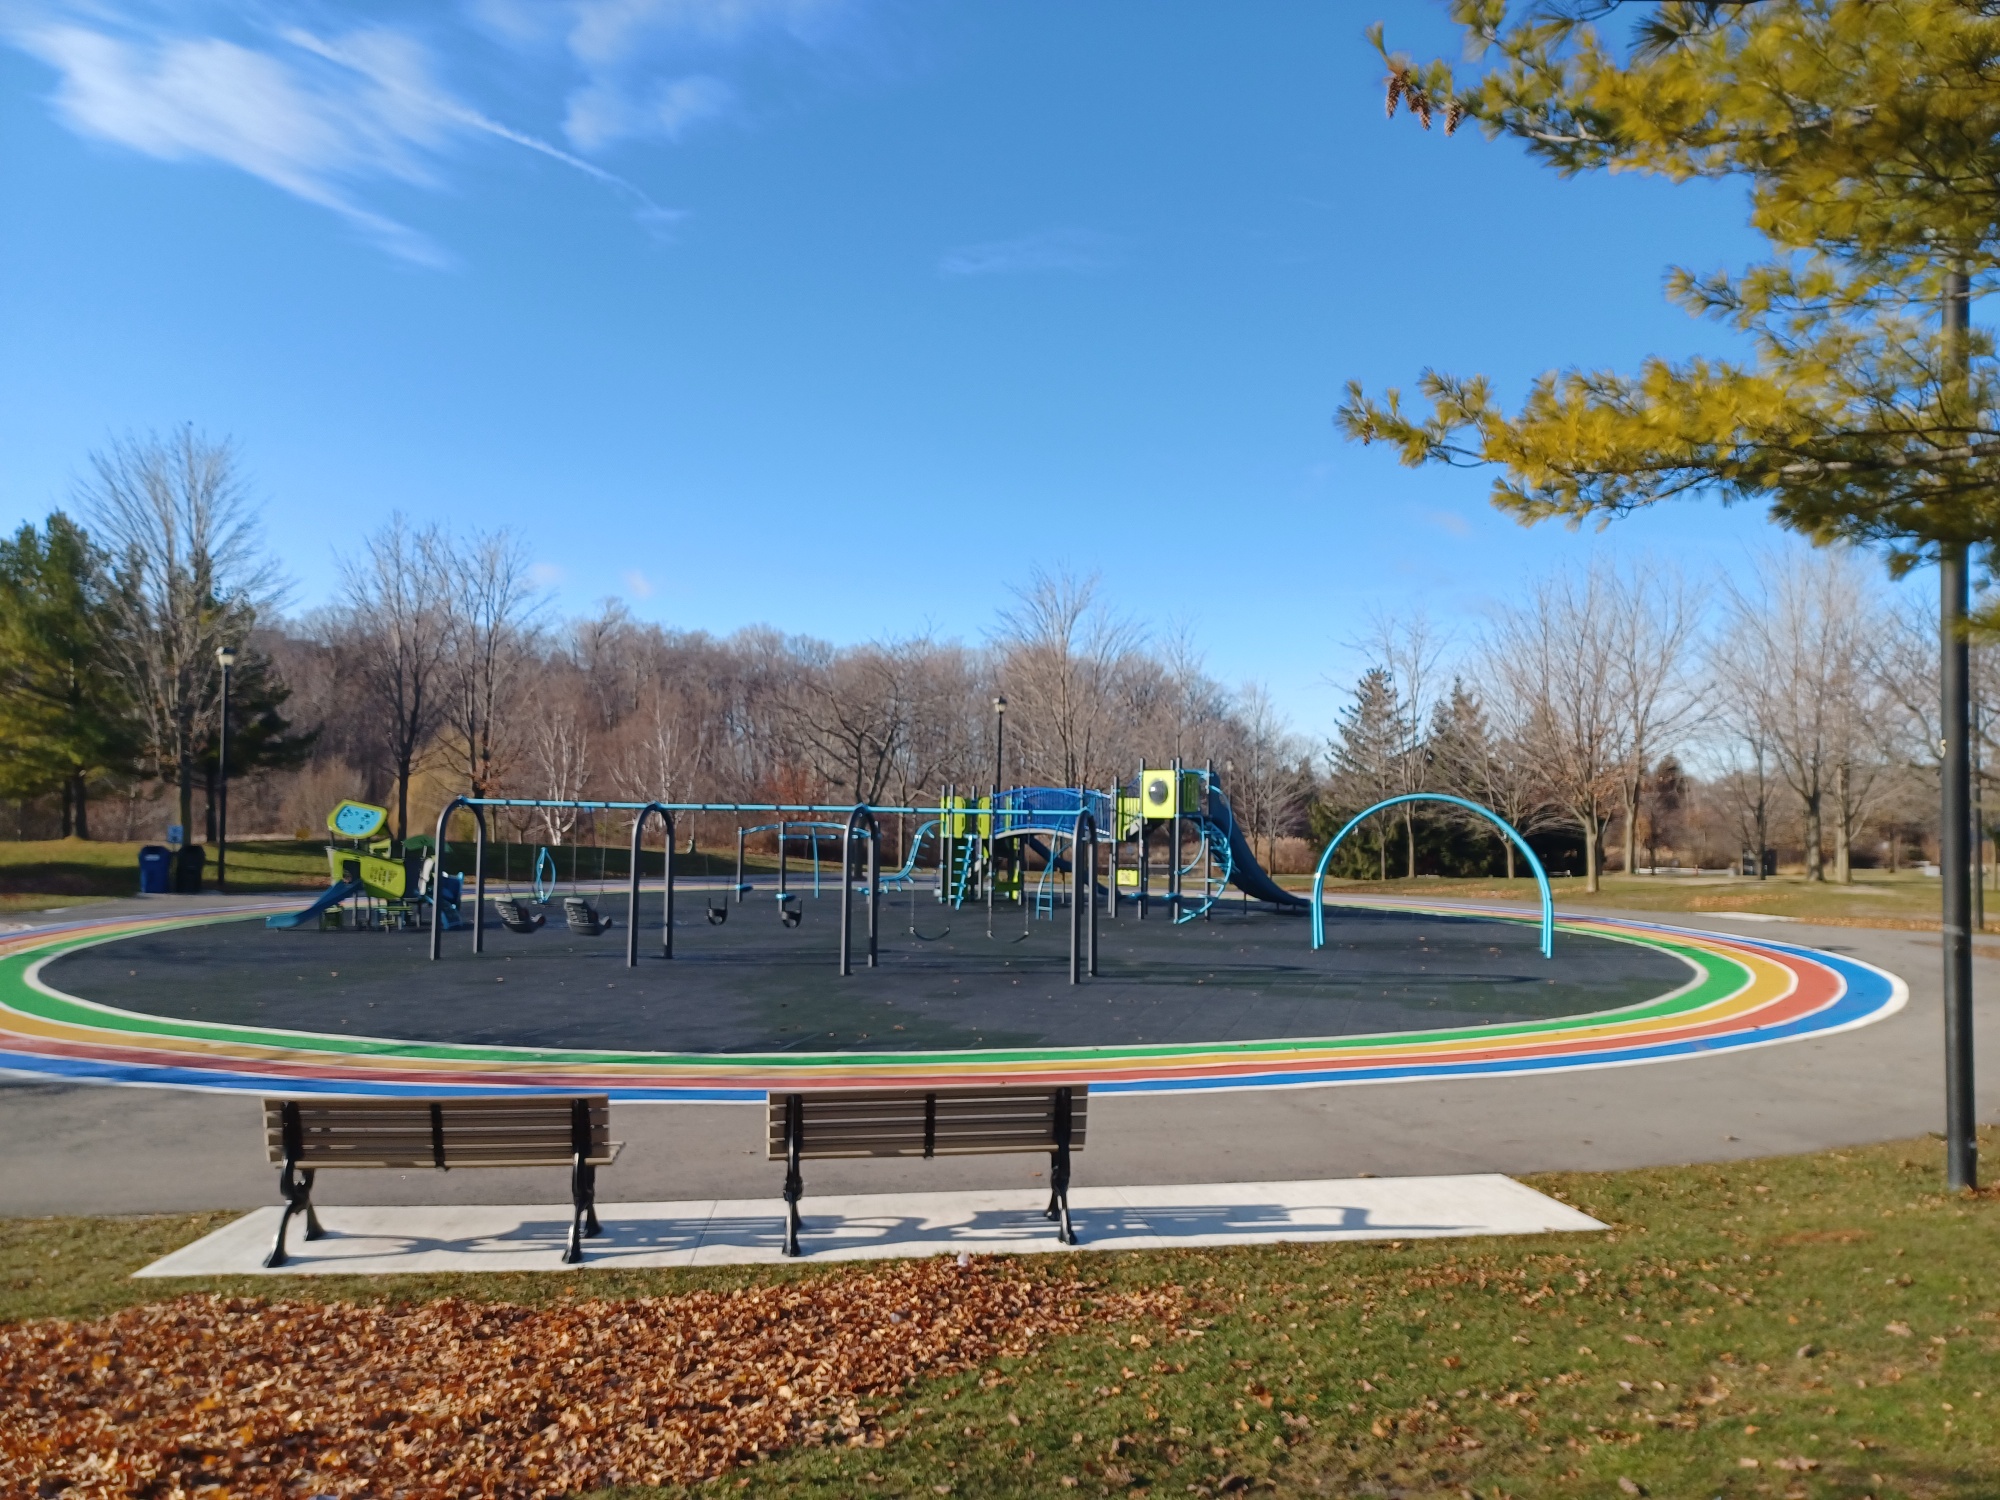 Milliken Park Playground after improvements which shows two benches in the foreground facing the new playground area which is circular in shape with equipment in blue and green. The playground area is surrounded by asphalt painted in rainbow colours.